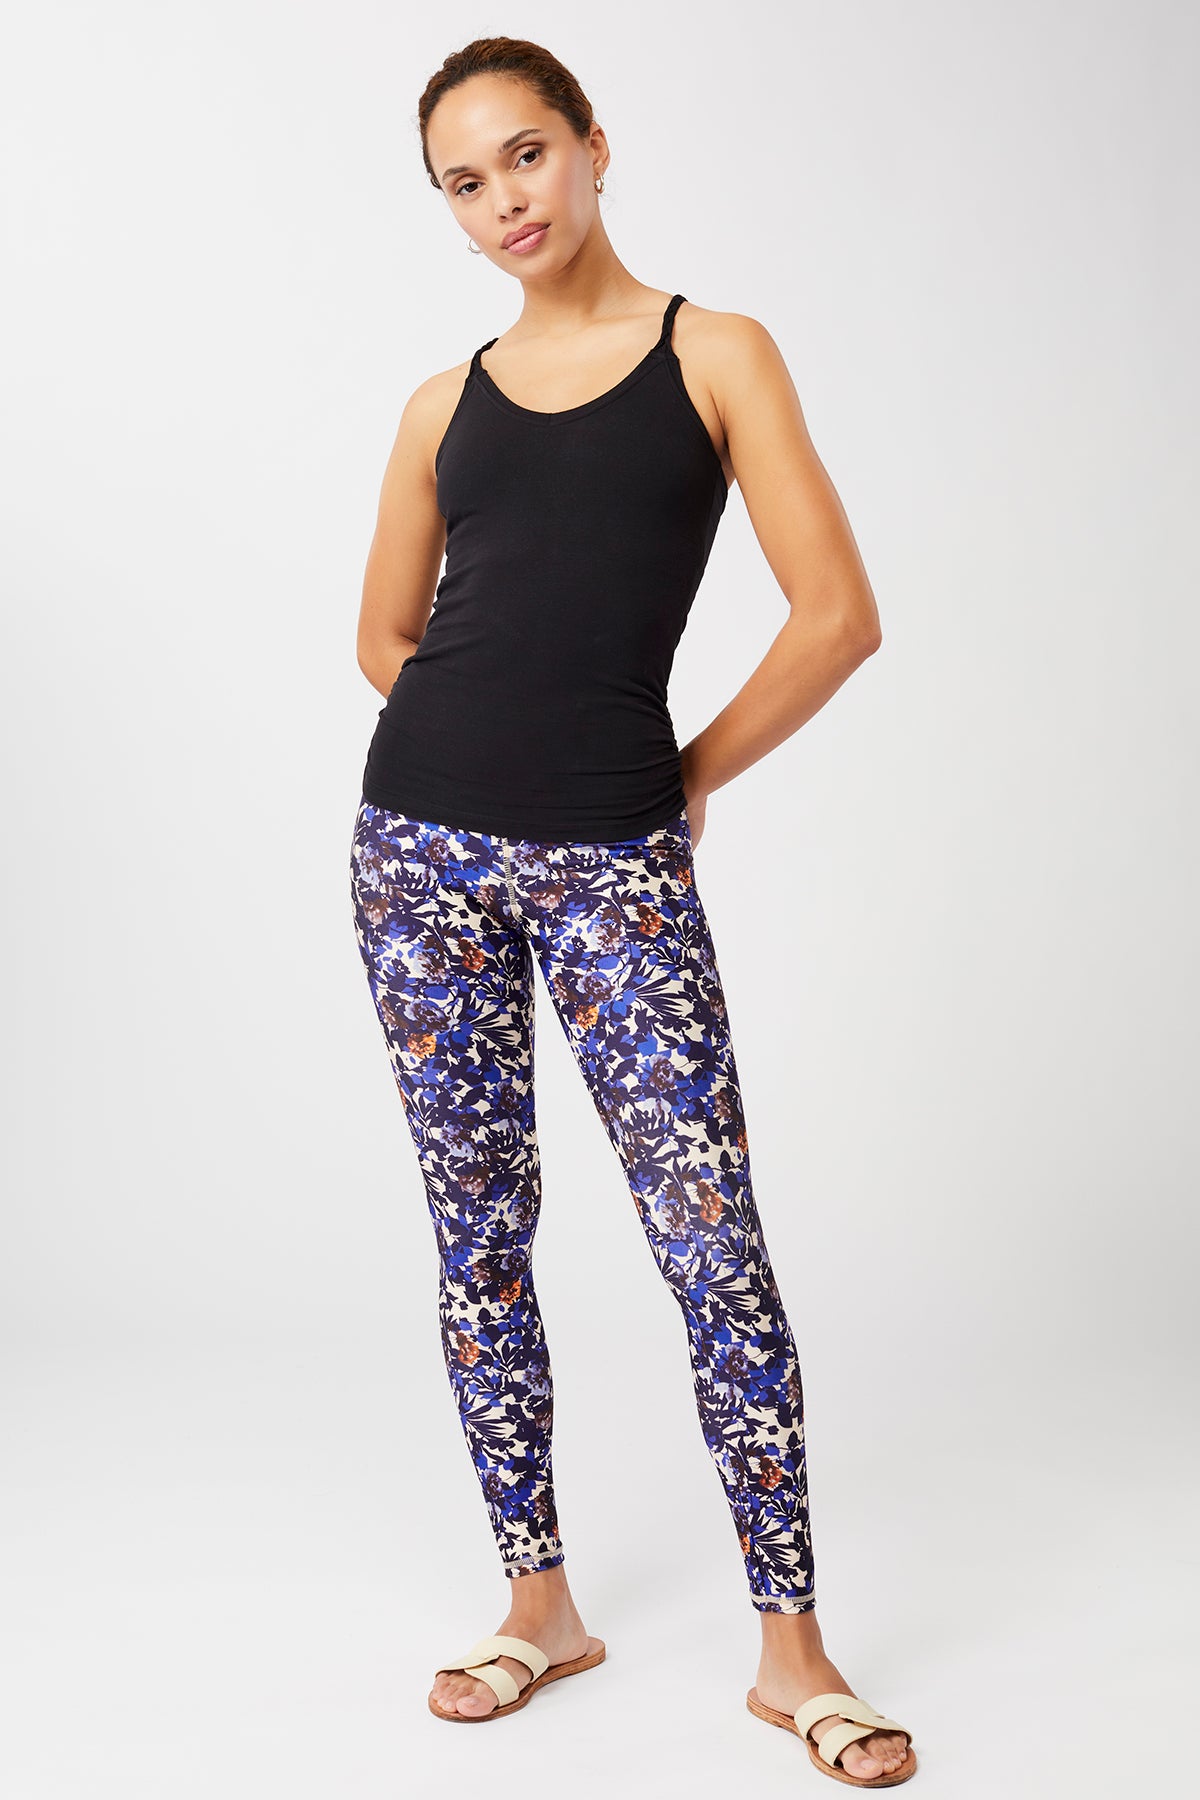 Mandala Yoga Top Schwarz Outfit Front - New Cable Top